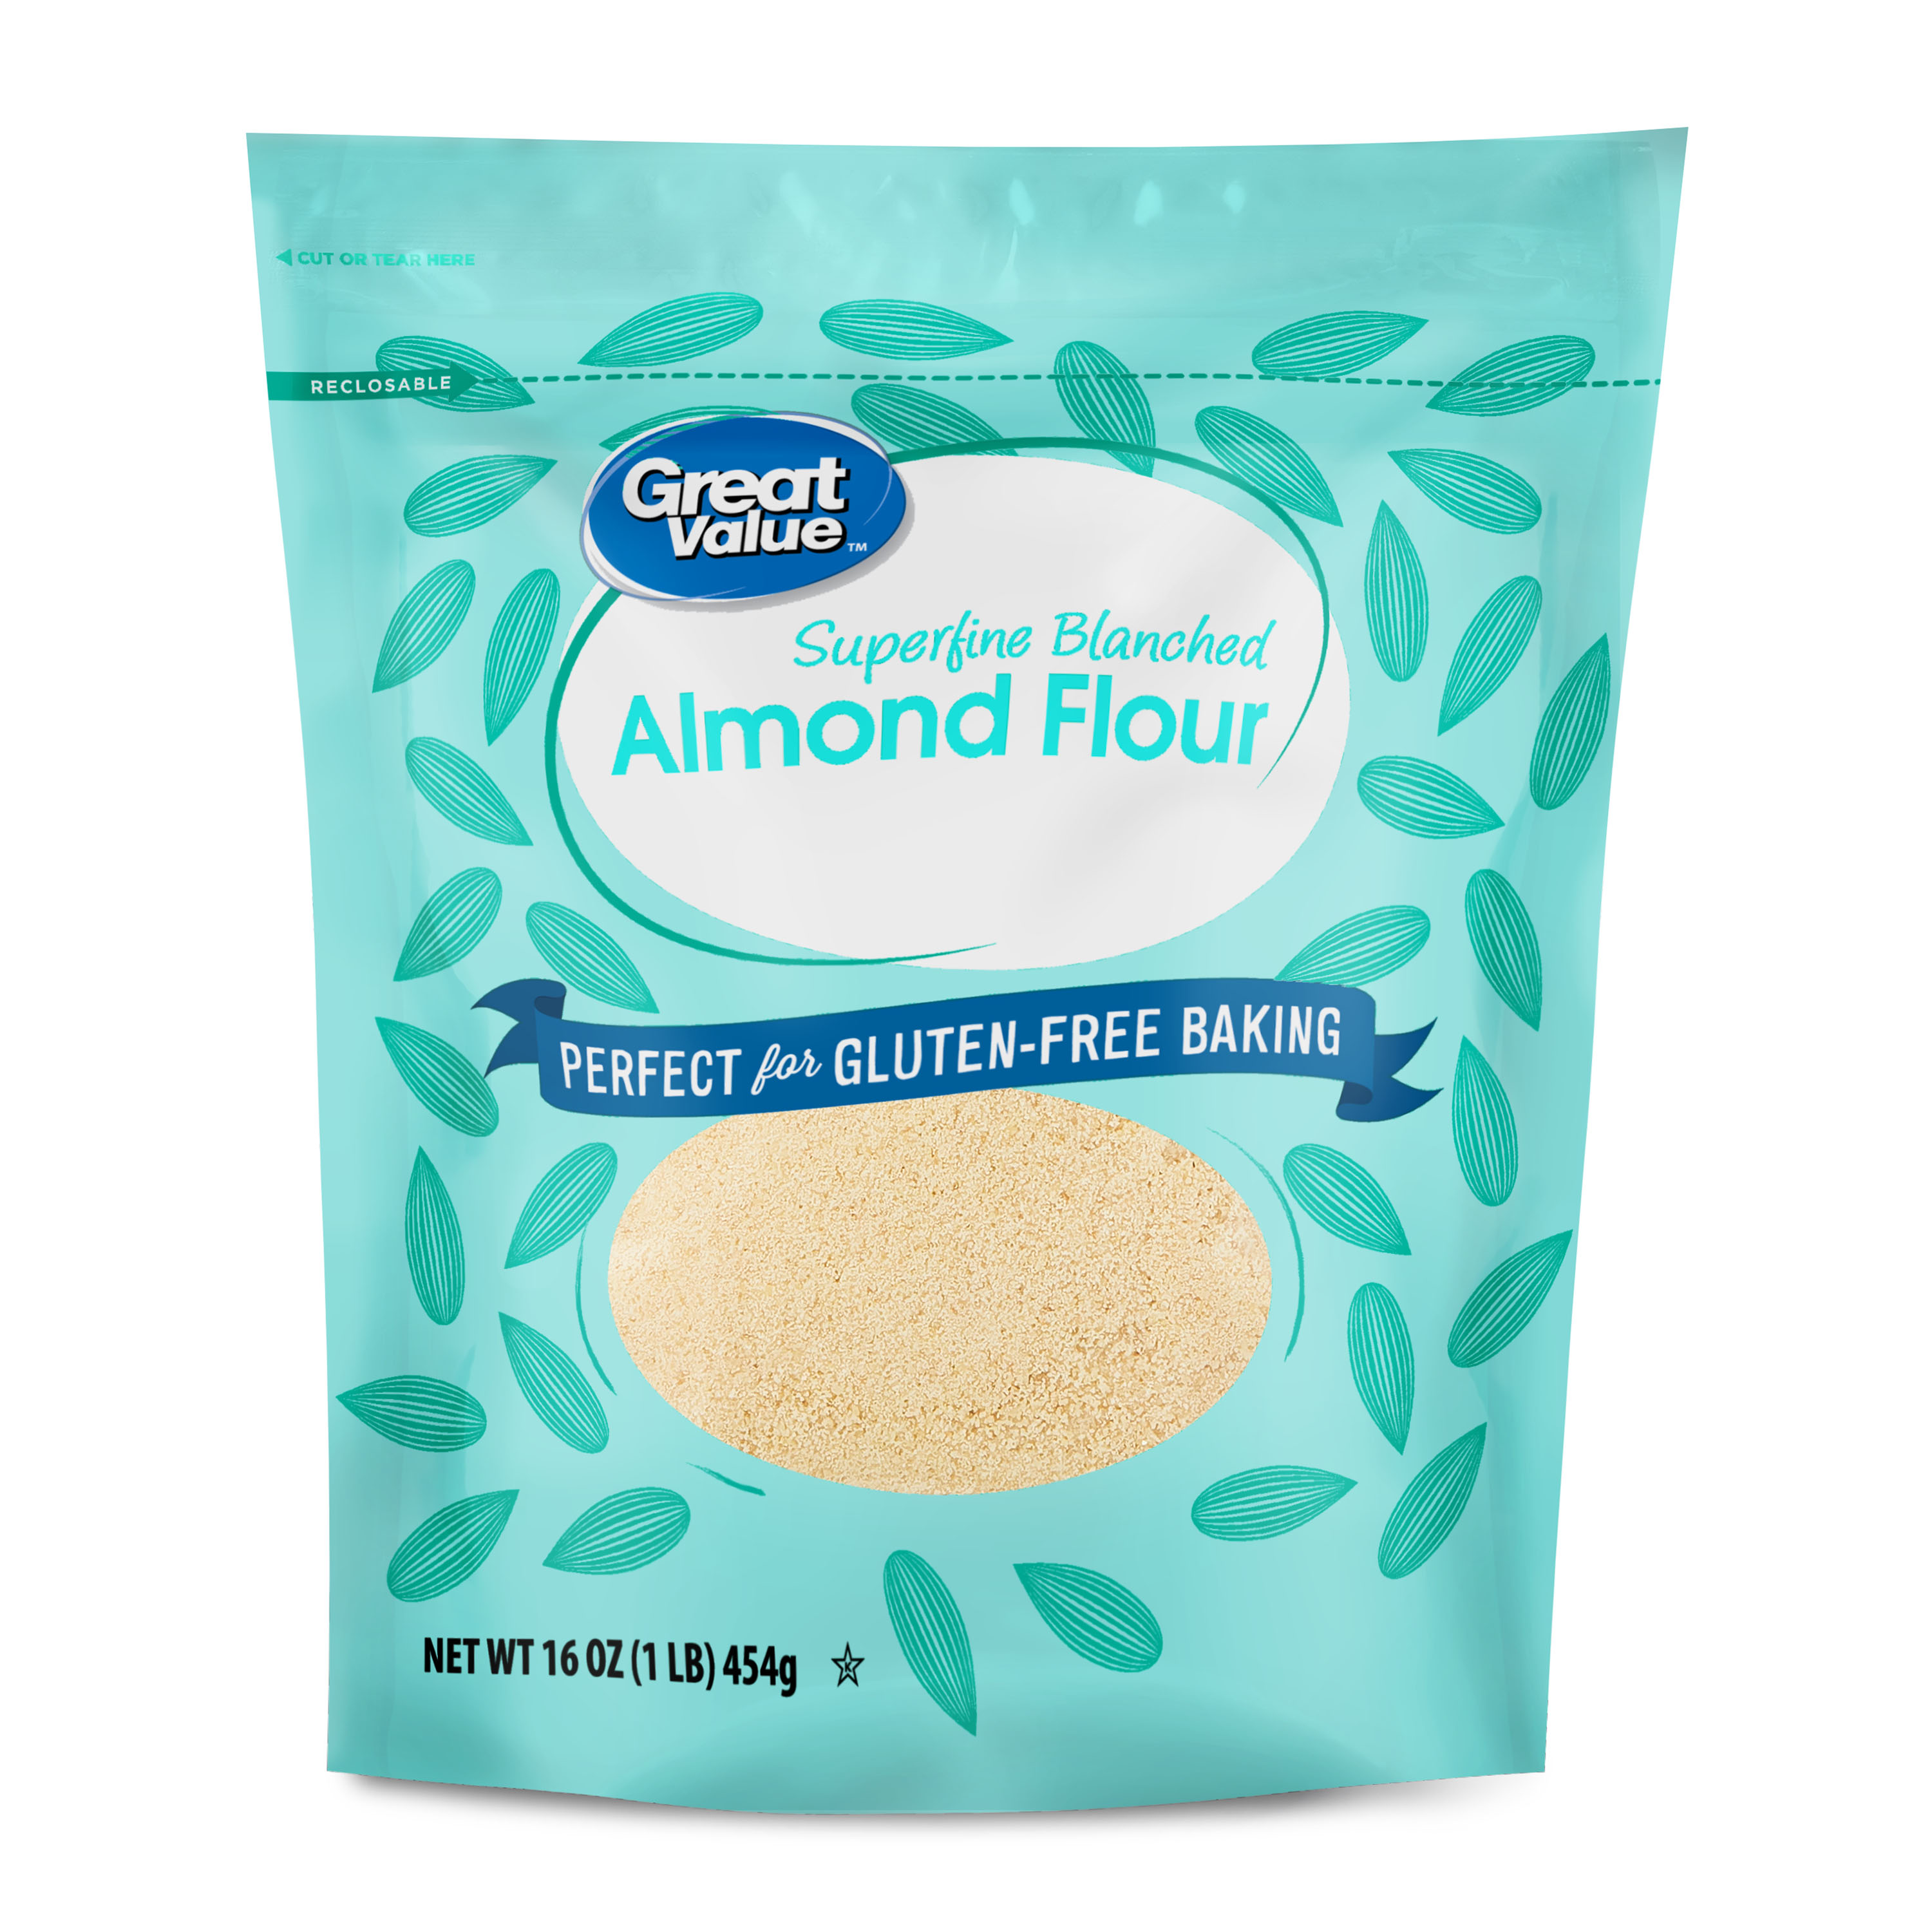 Great Value Superfine Blanched Almond Flour, 2 lb - image 1 of 7